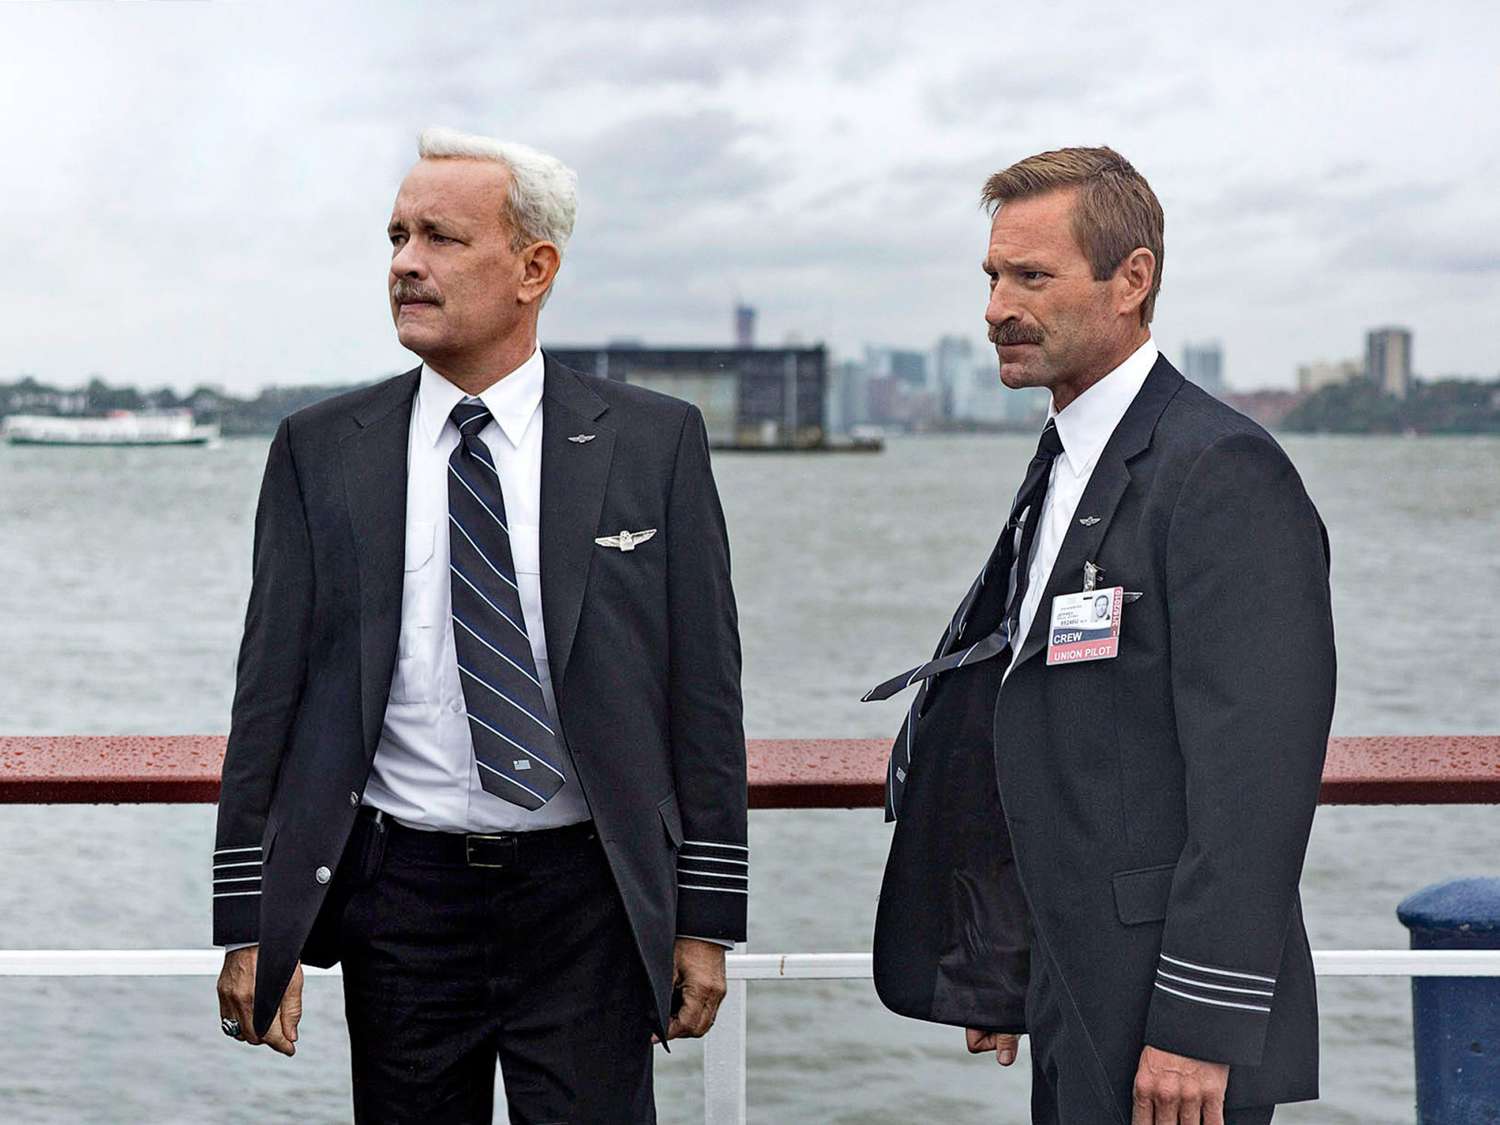 Snub: Sully&nbsp;for Best Picture